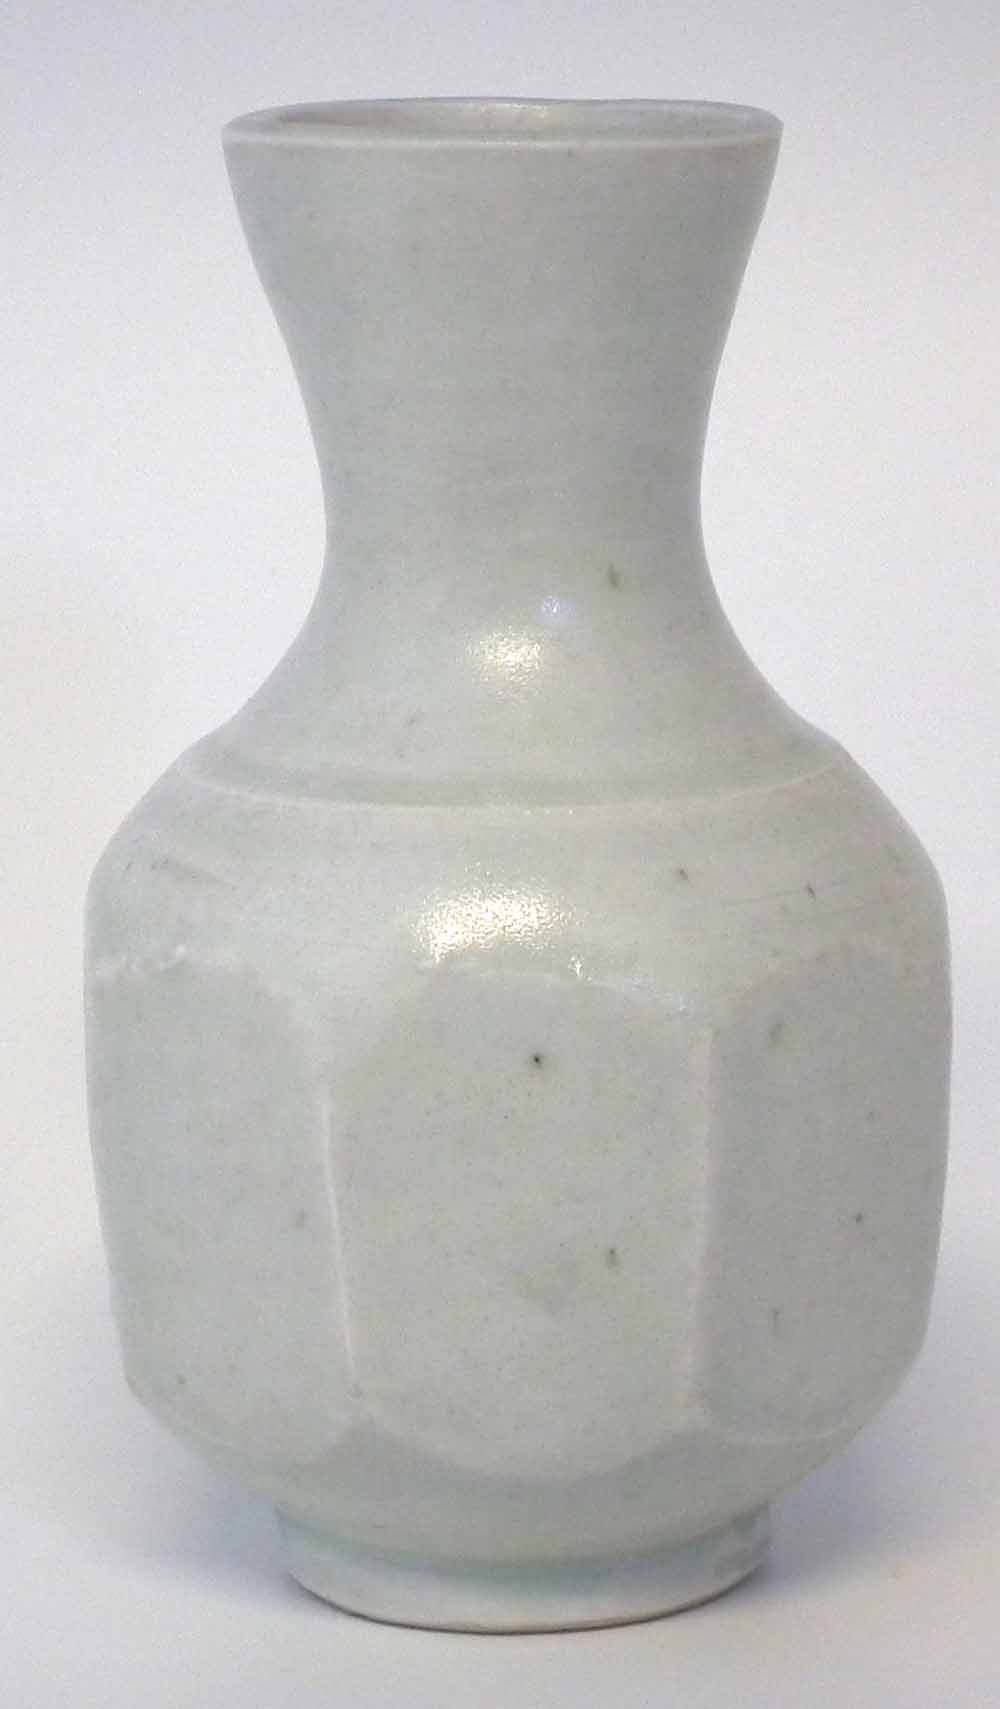 Bernard Leach  (1887-1979) St Ives studio pottery vase, with octagonal facetted body decorated